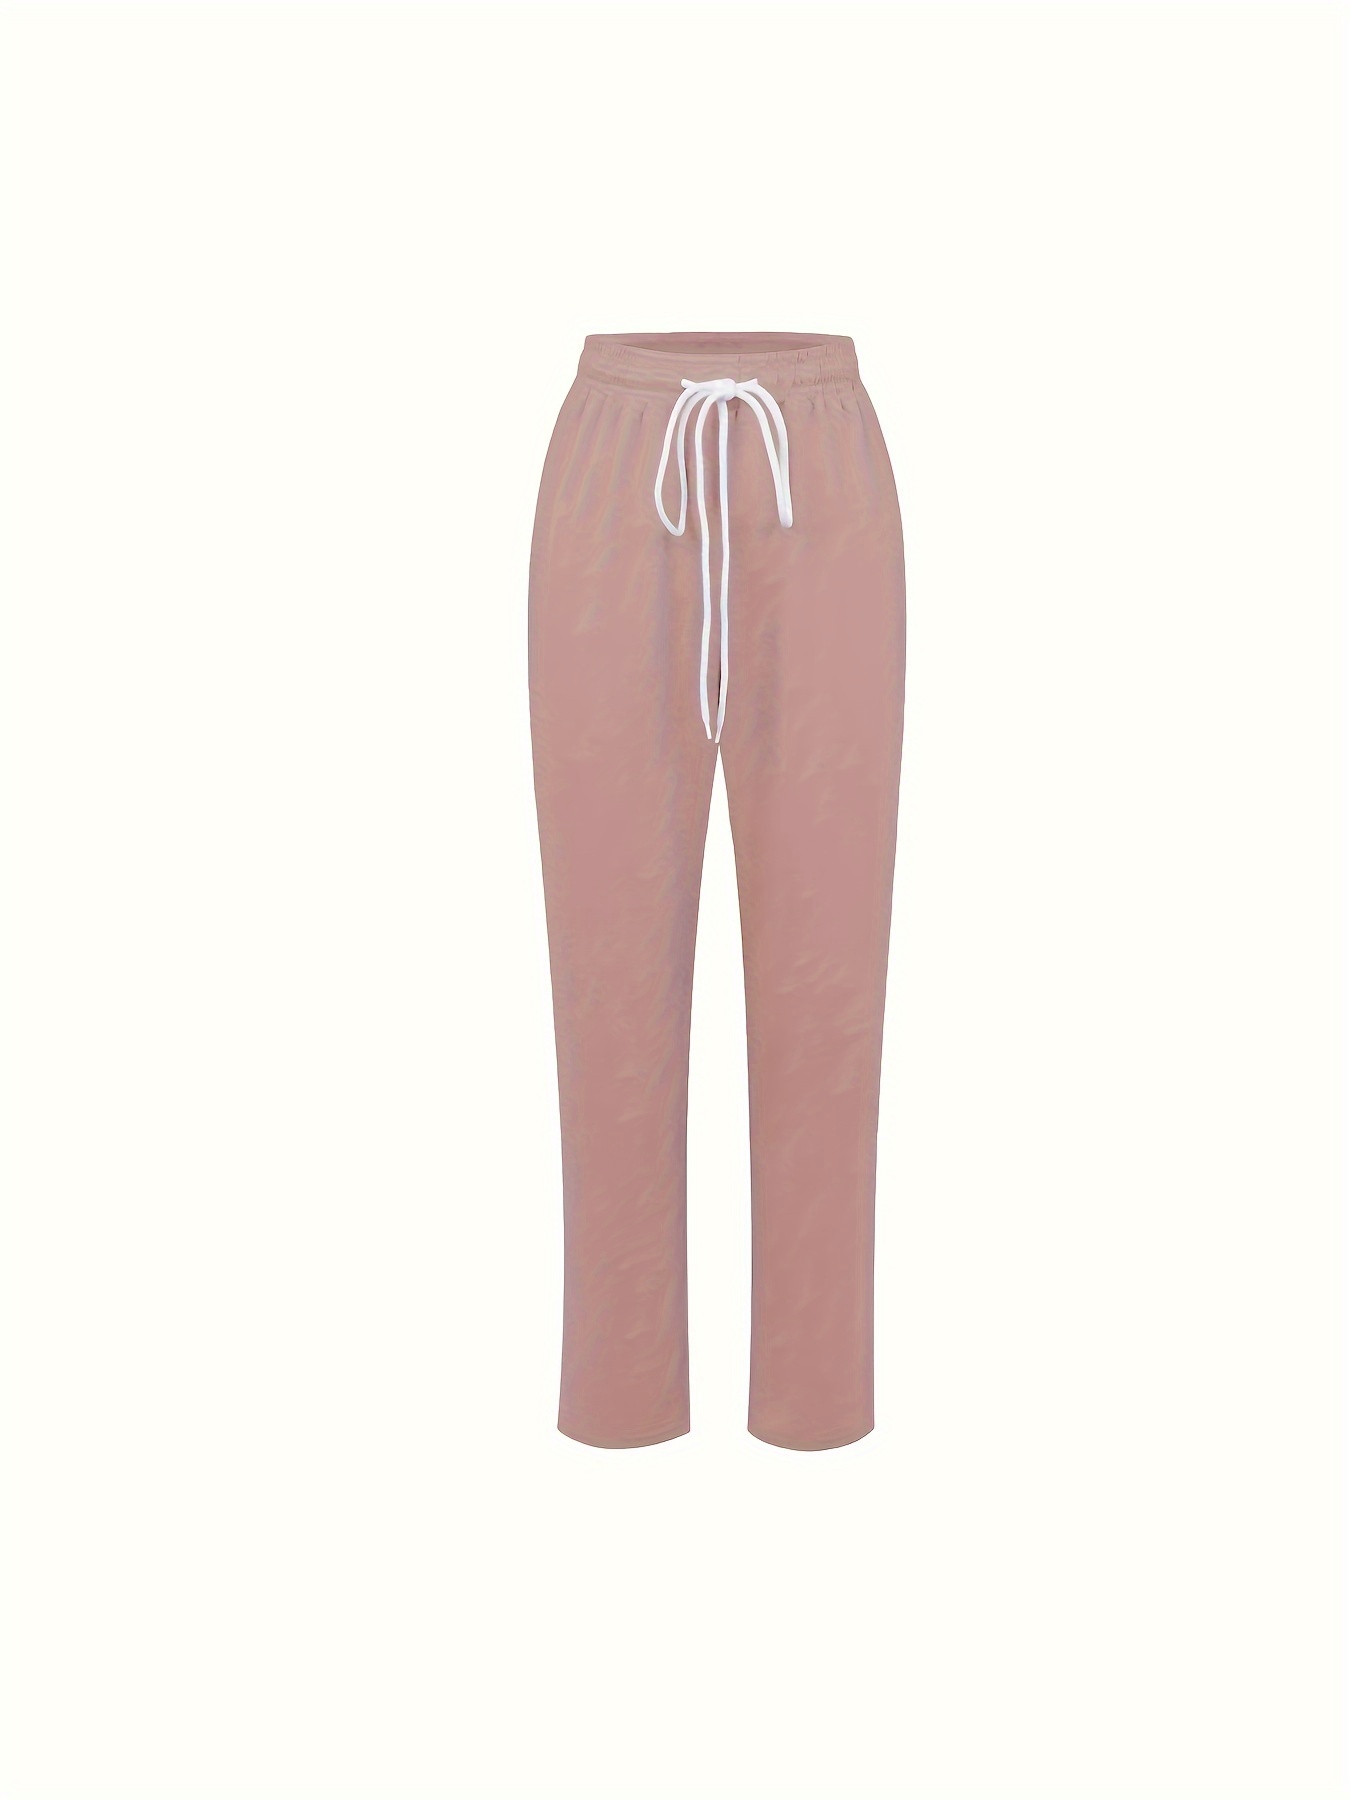   Outlet Stores Plus Pant 2 Piece Outfits for Women Casual  Solid Color Sweatsuit Fashion Long Sleeve Pullover Drawstring Long Pants  Sets Fall  Lightning Deals of The Day : Clothing